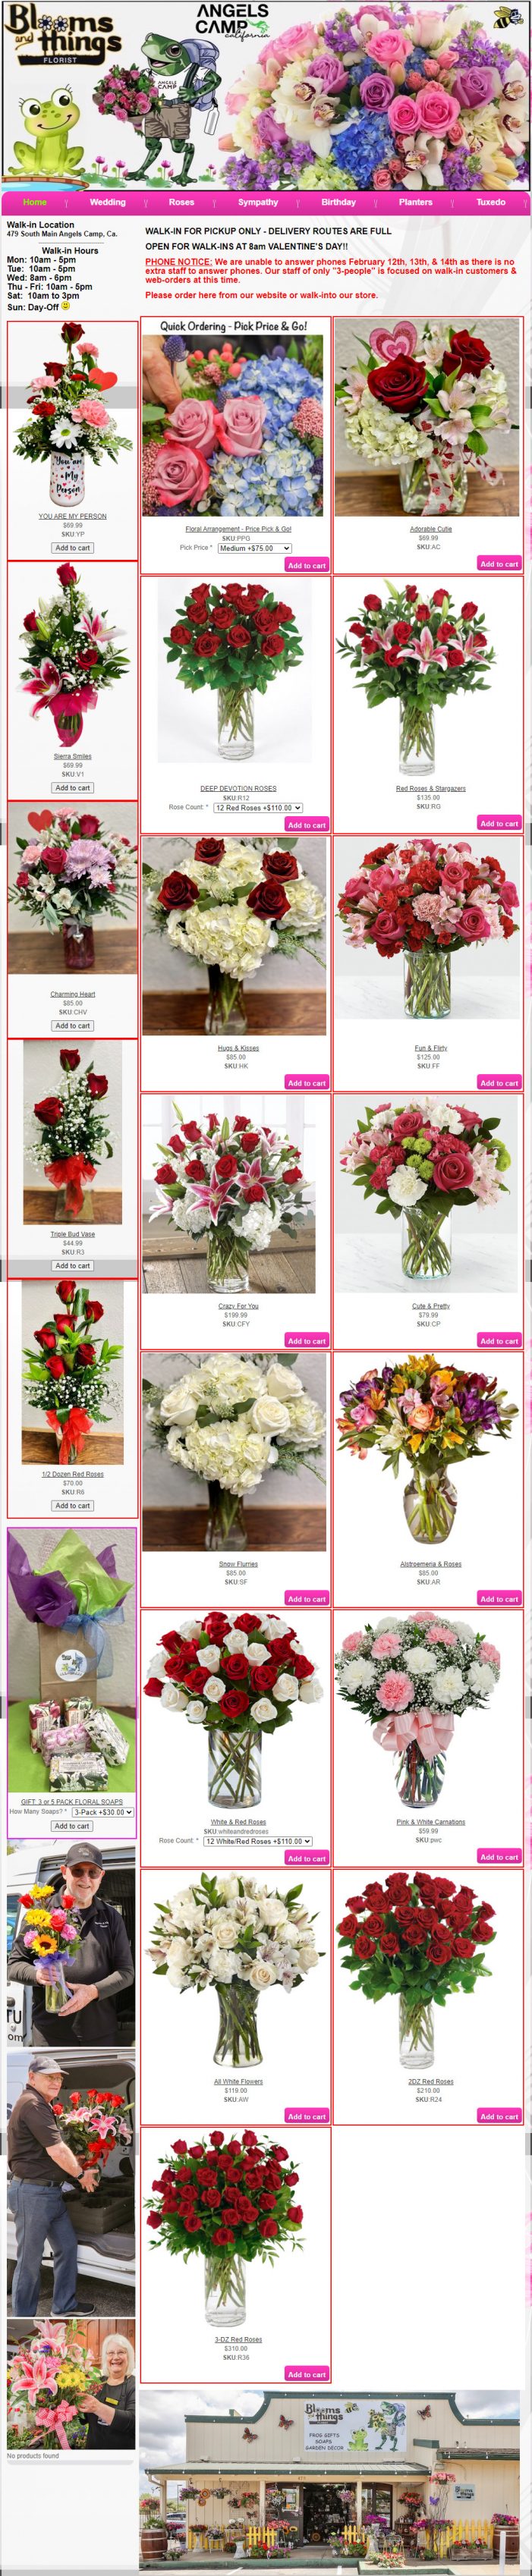 Your Perfect Valentine’s Gift Awaits at Blooms & Things!